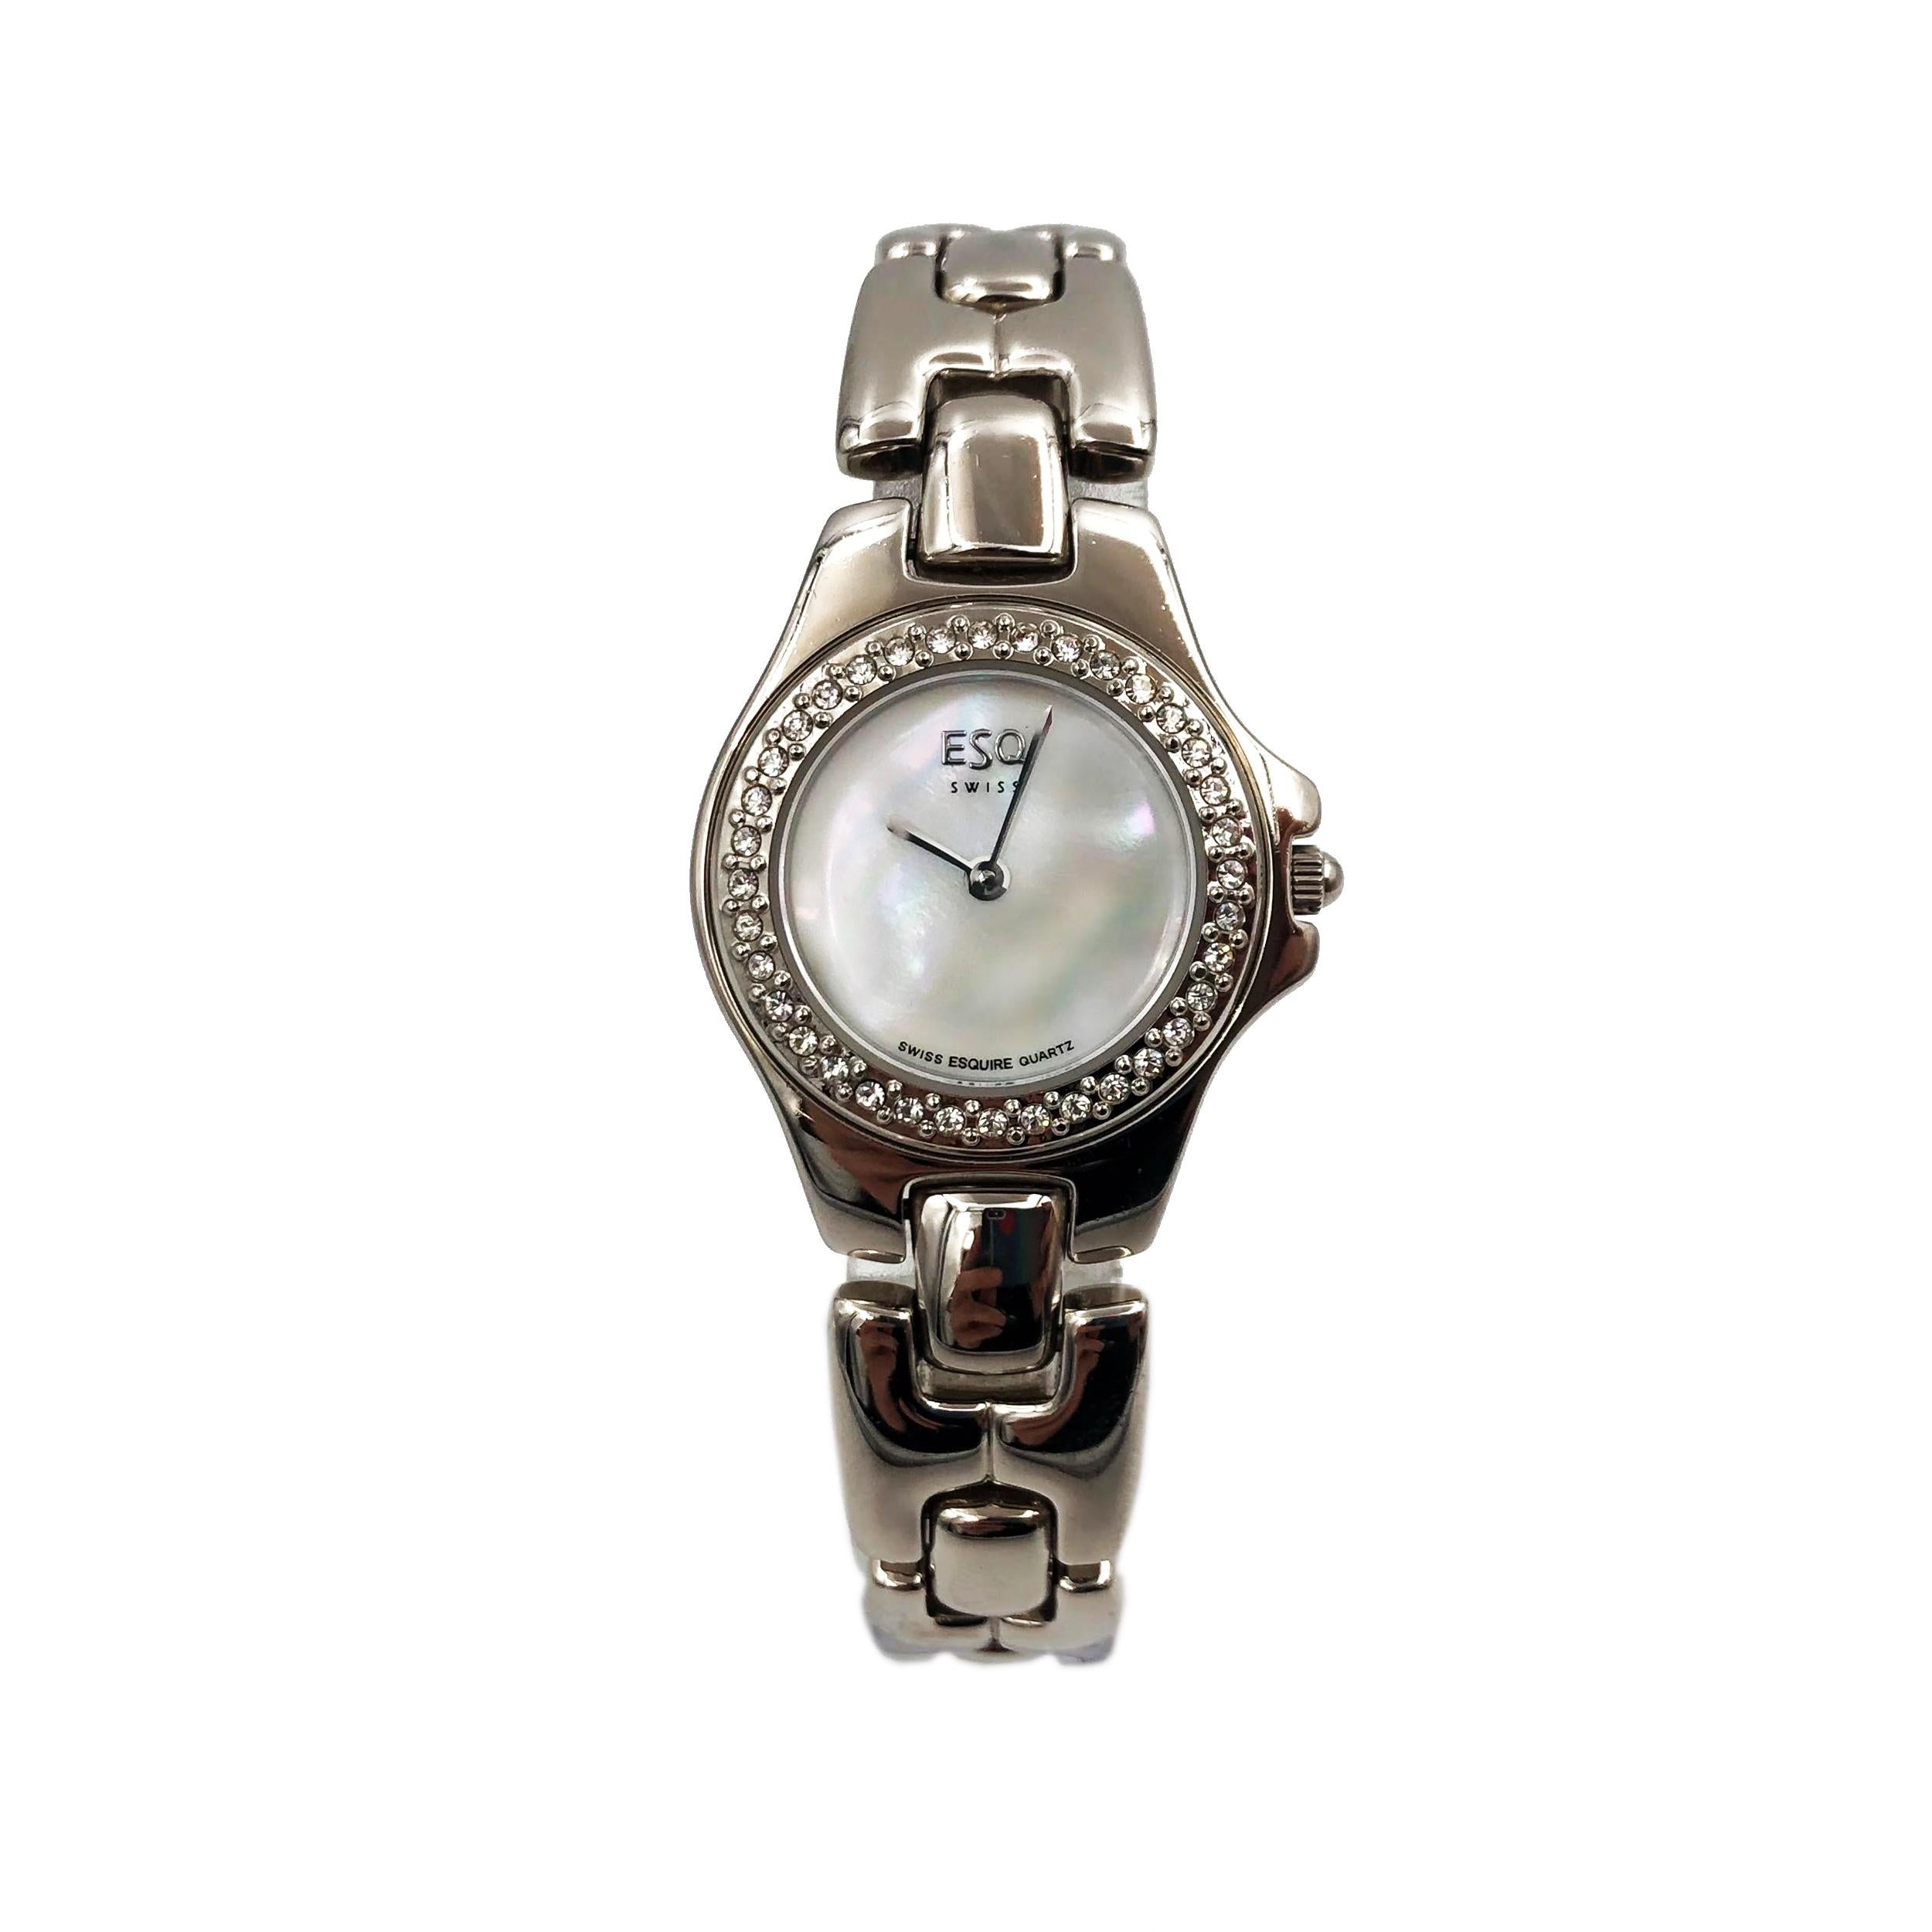 Pre Owned ESQ Movado Stainless Steel White MOP Dial Quartz Ladies Watch 100533A. The Watch Has Minor Scratches. This Beautiful Timepiece is powered by a Quartz (Battery) Movement and Features: a Silver-Tone Case and Bracelet, Fixed Silver-Tone